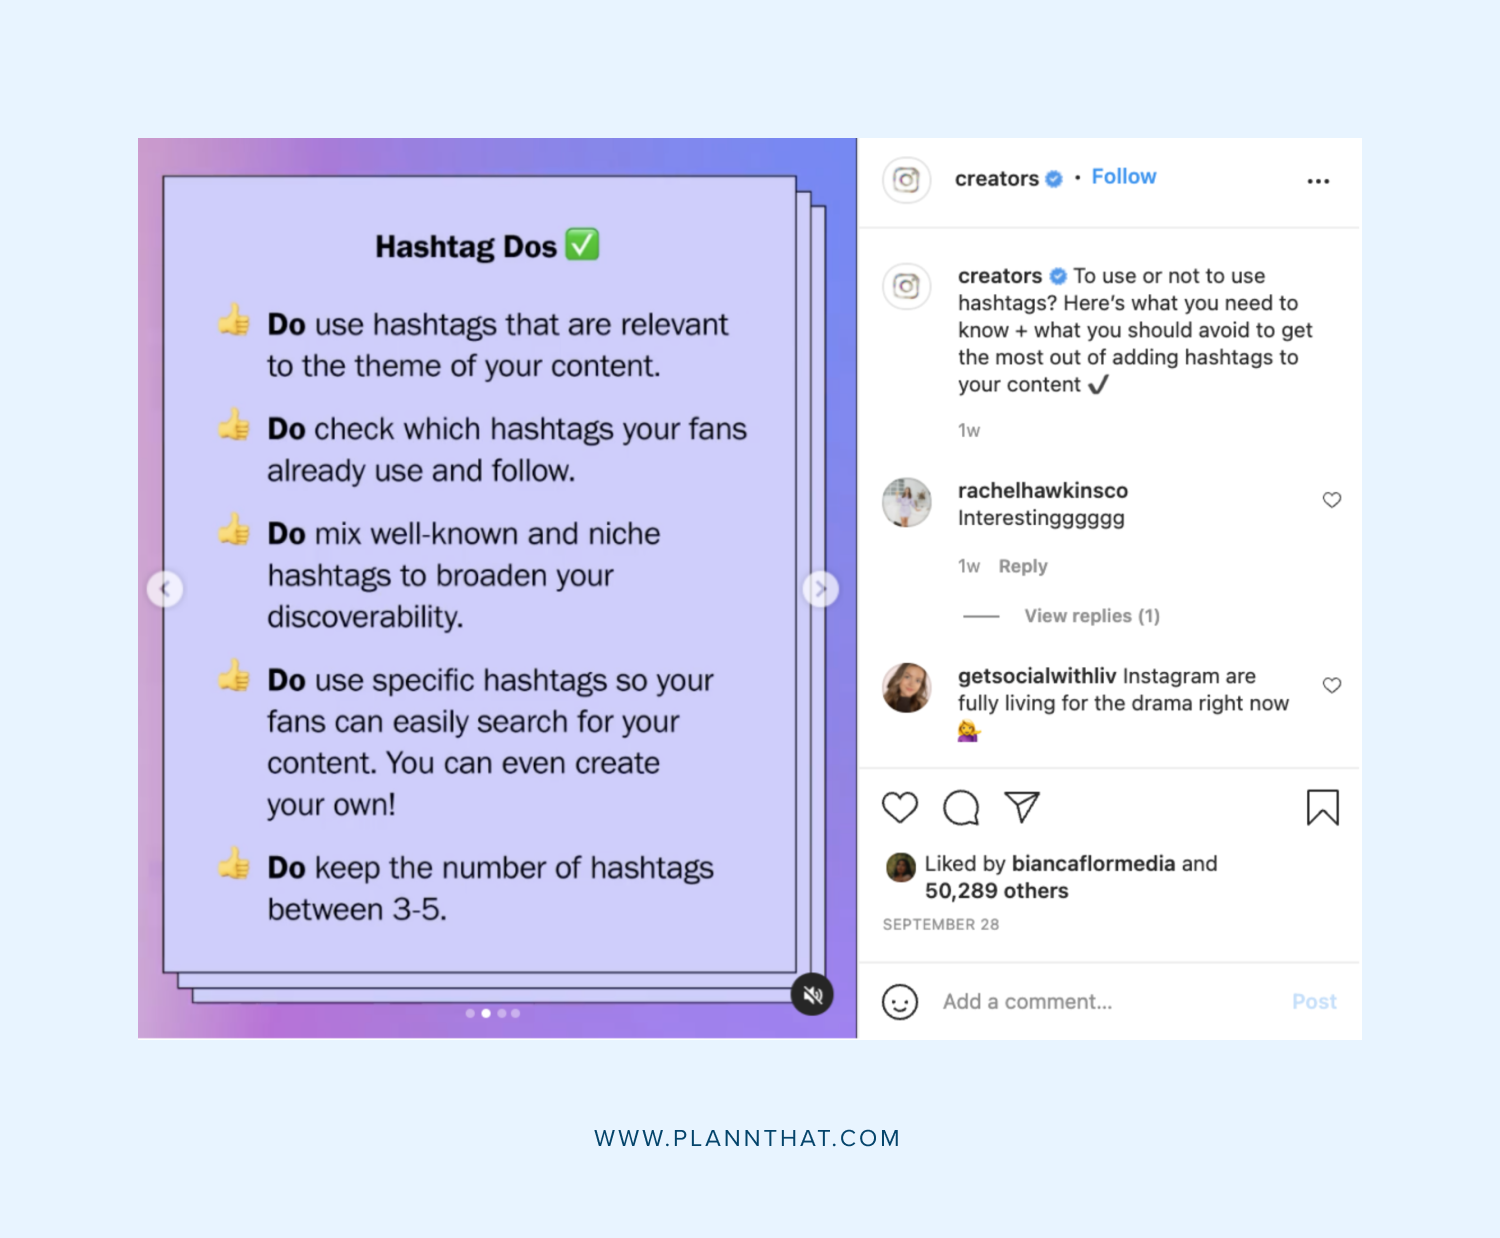 Instagram has announced new best practices for using hashtags